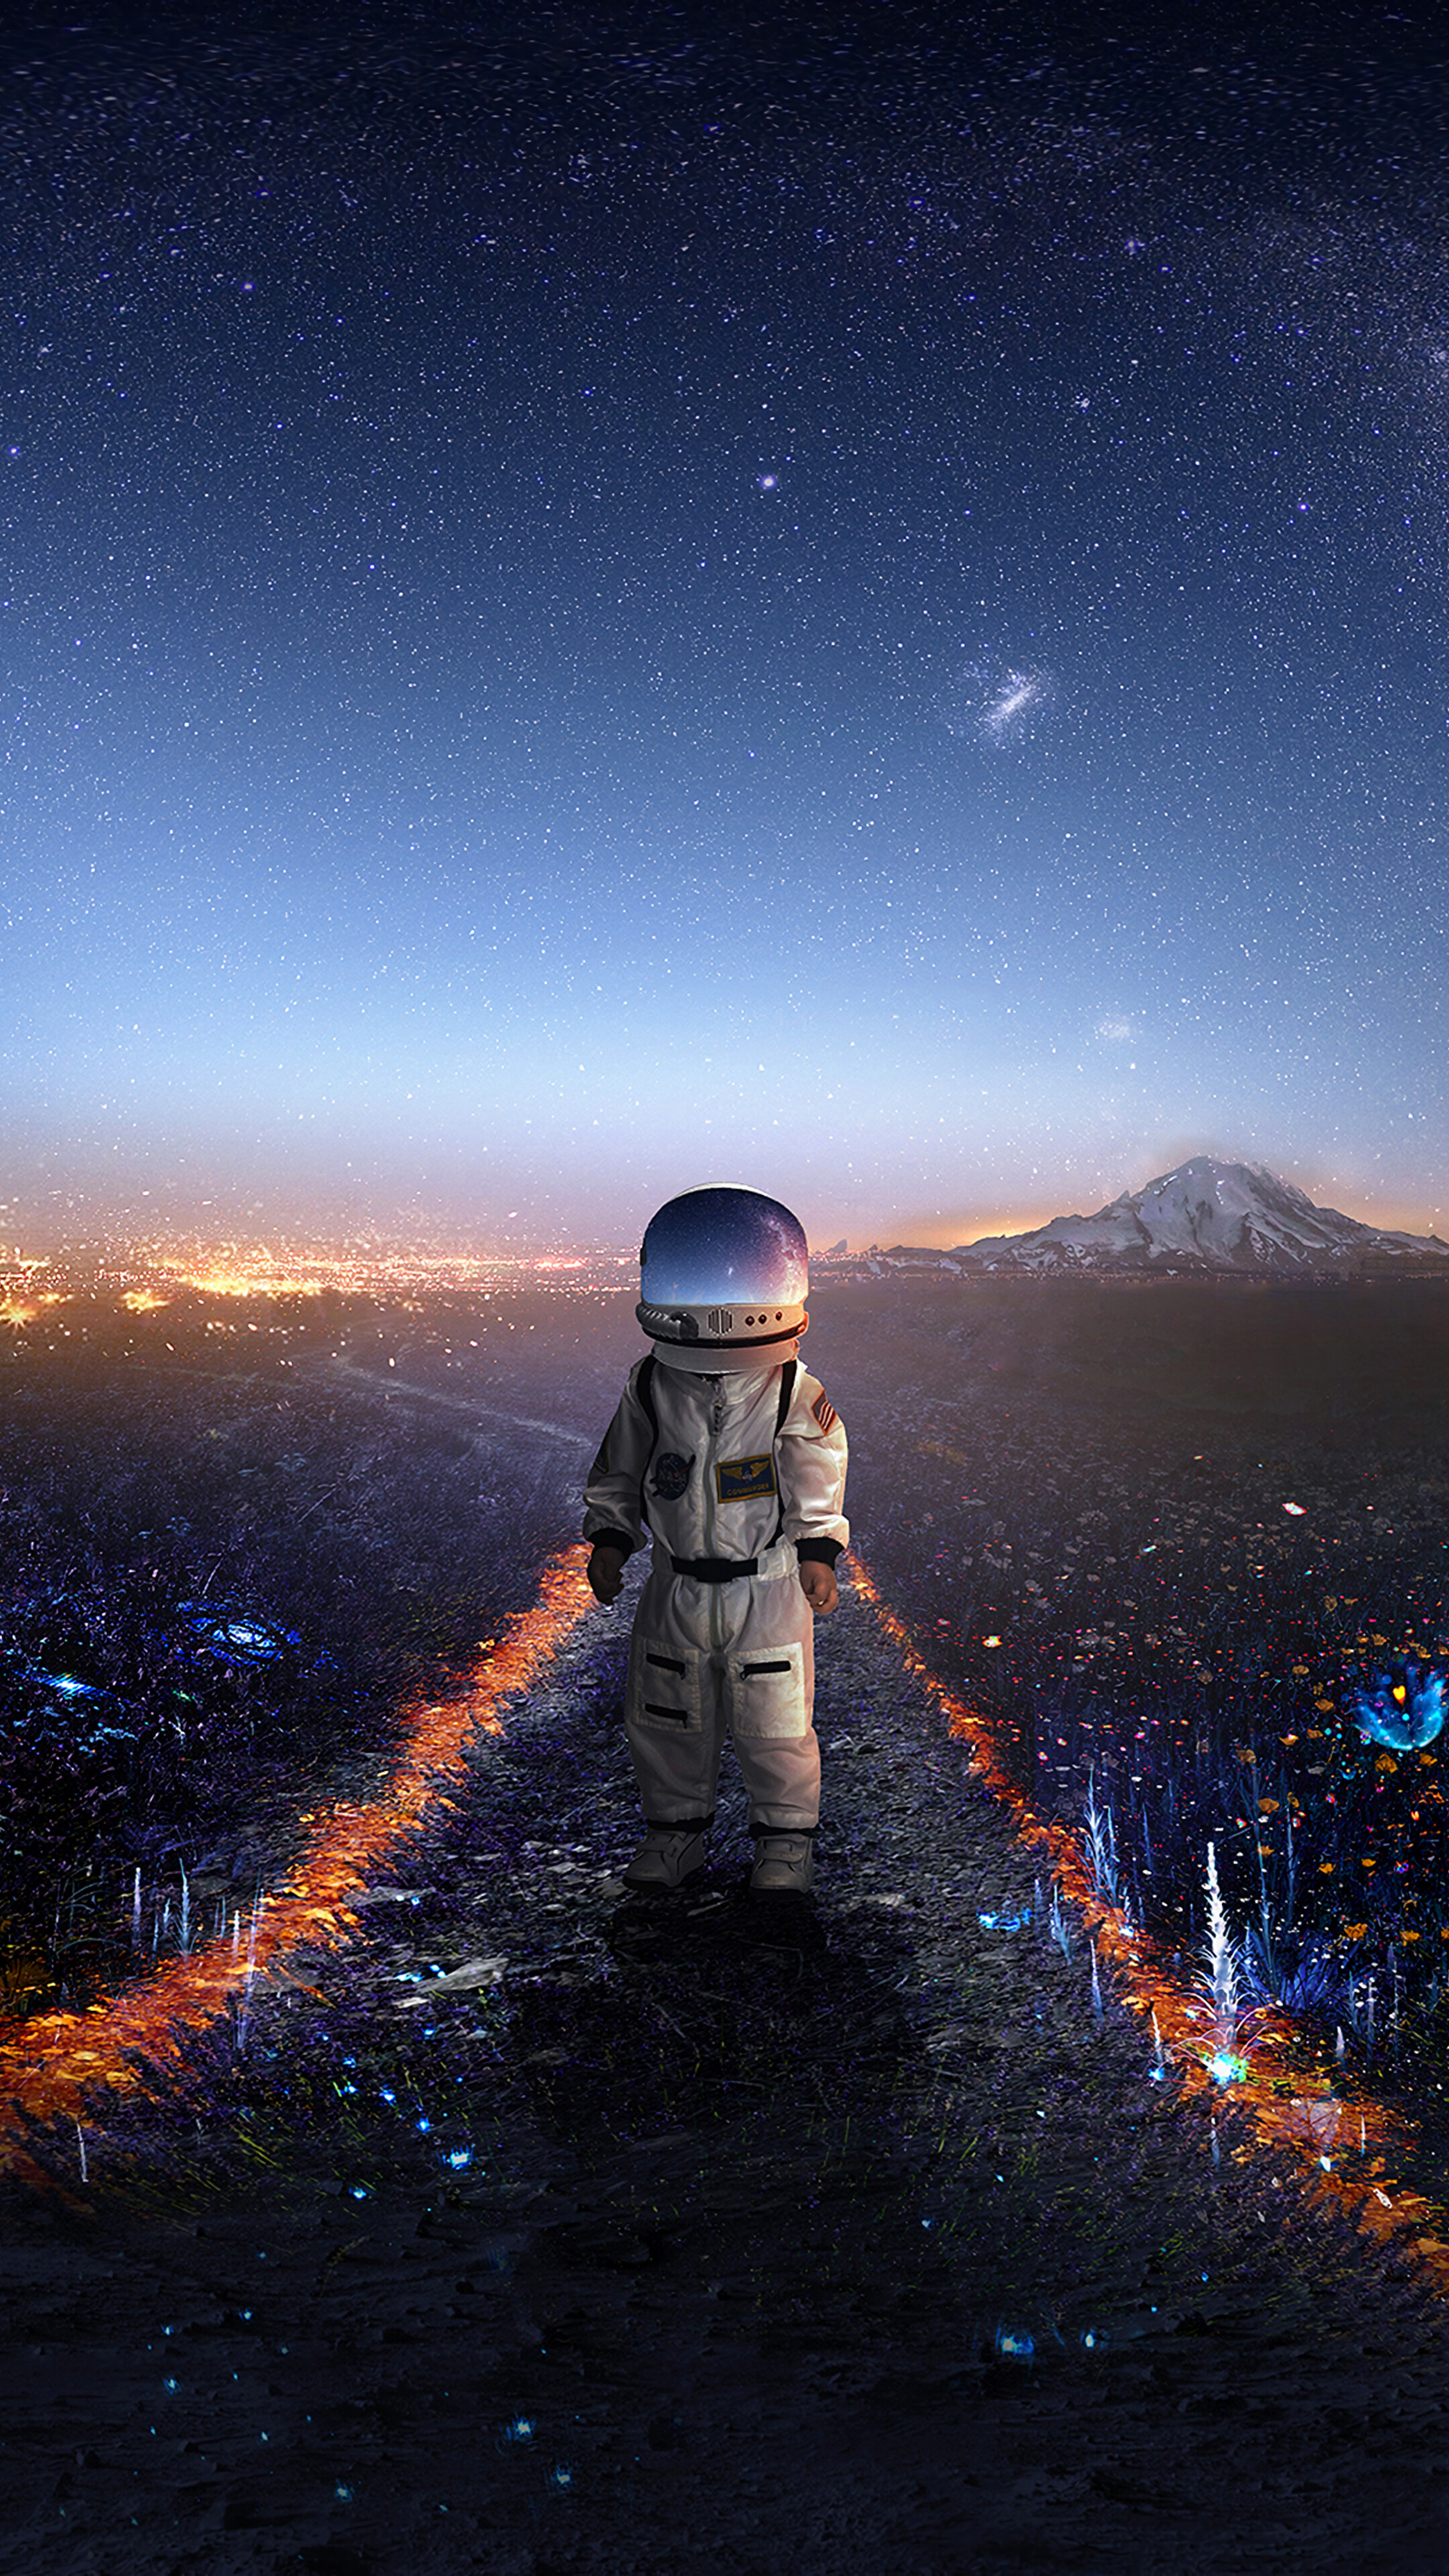 Astronaut, Scenery, Digital Art, 4K phone HD Wallpaper, Image, Background, Photo and Picture. Mocah HD Wallpaper